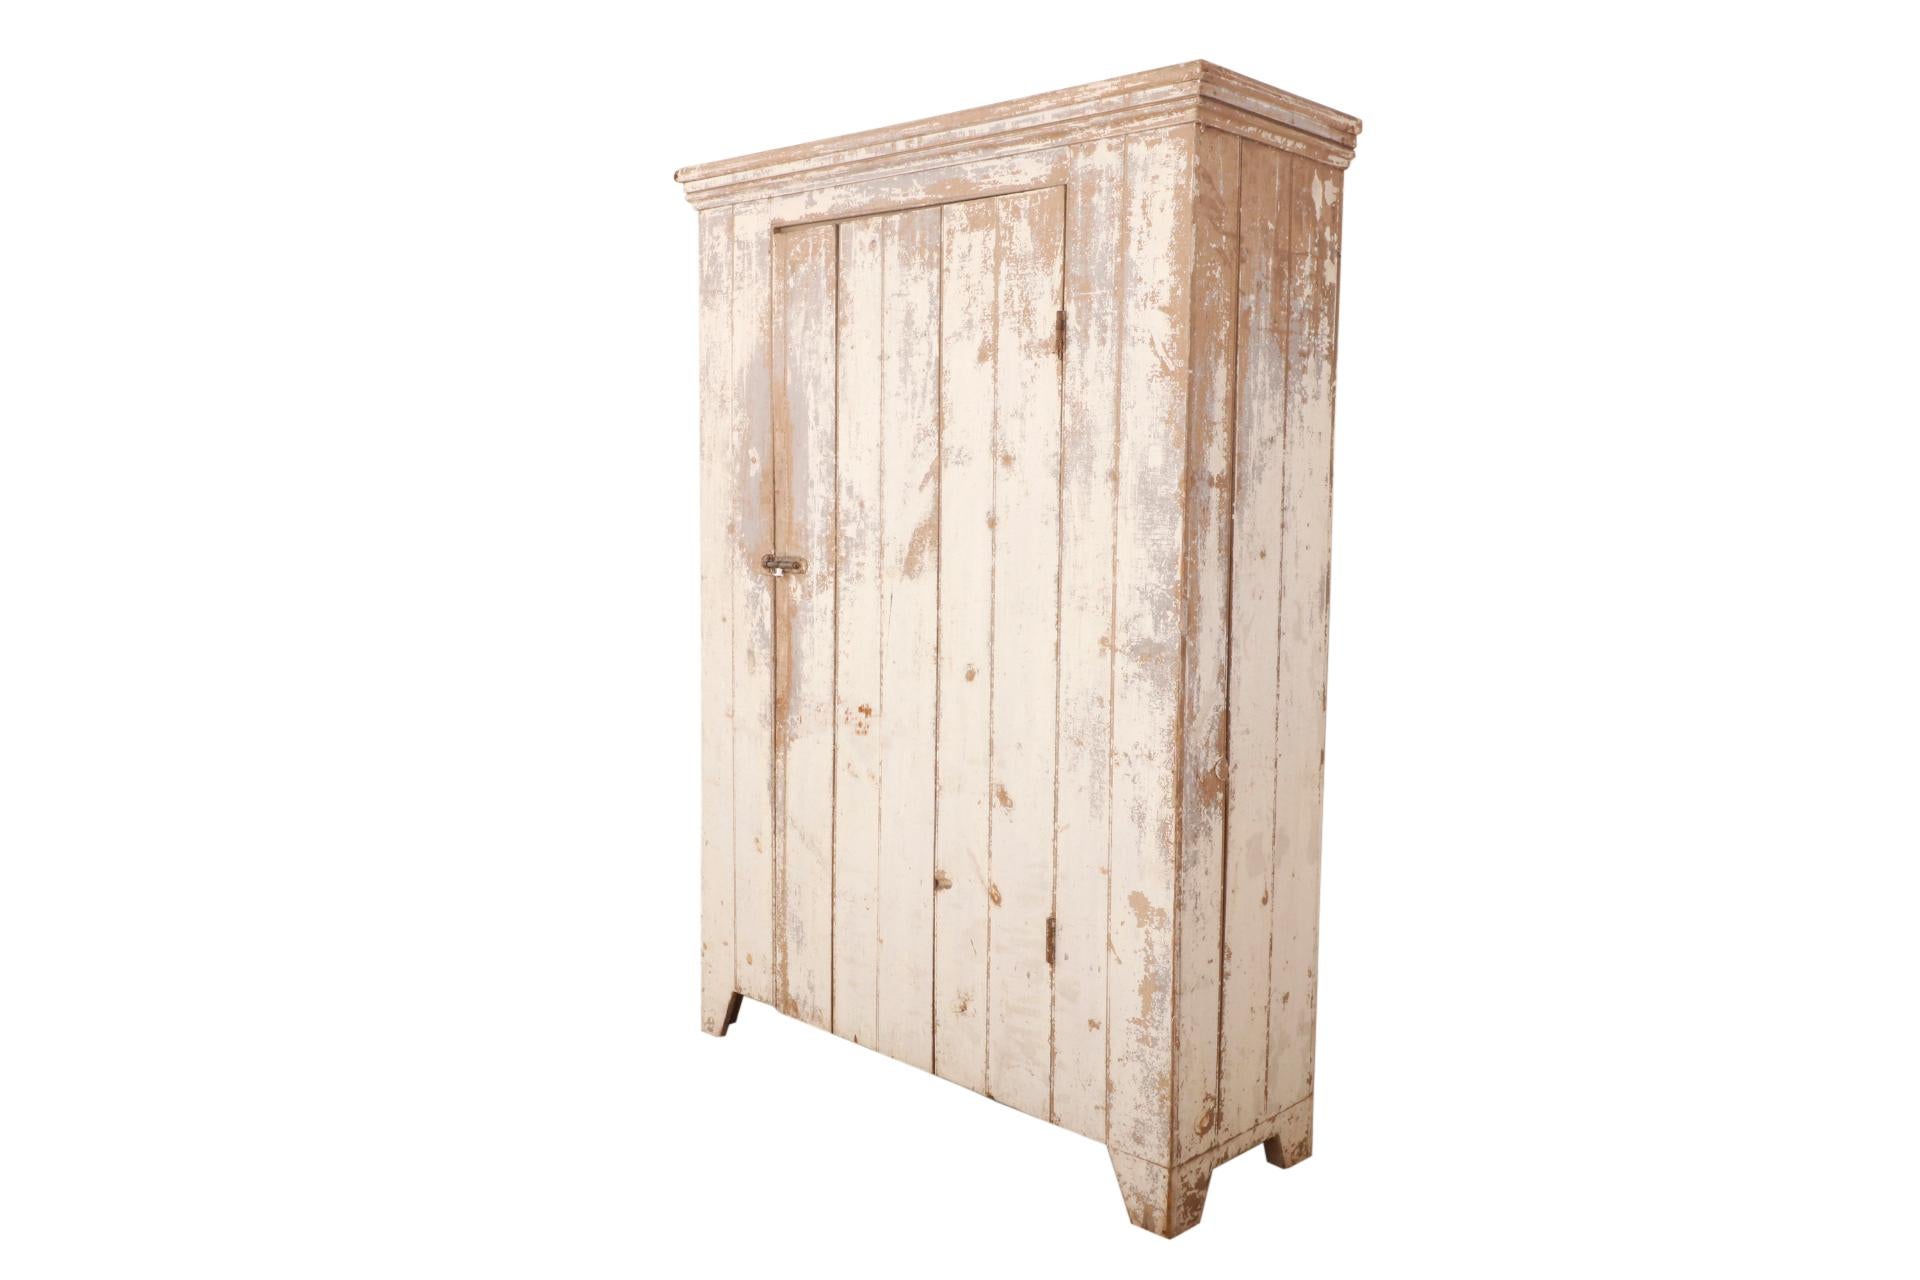 Beautifully washed and worn painted finish. Large size and exceptional storage capacity.